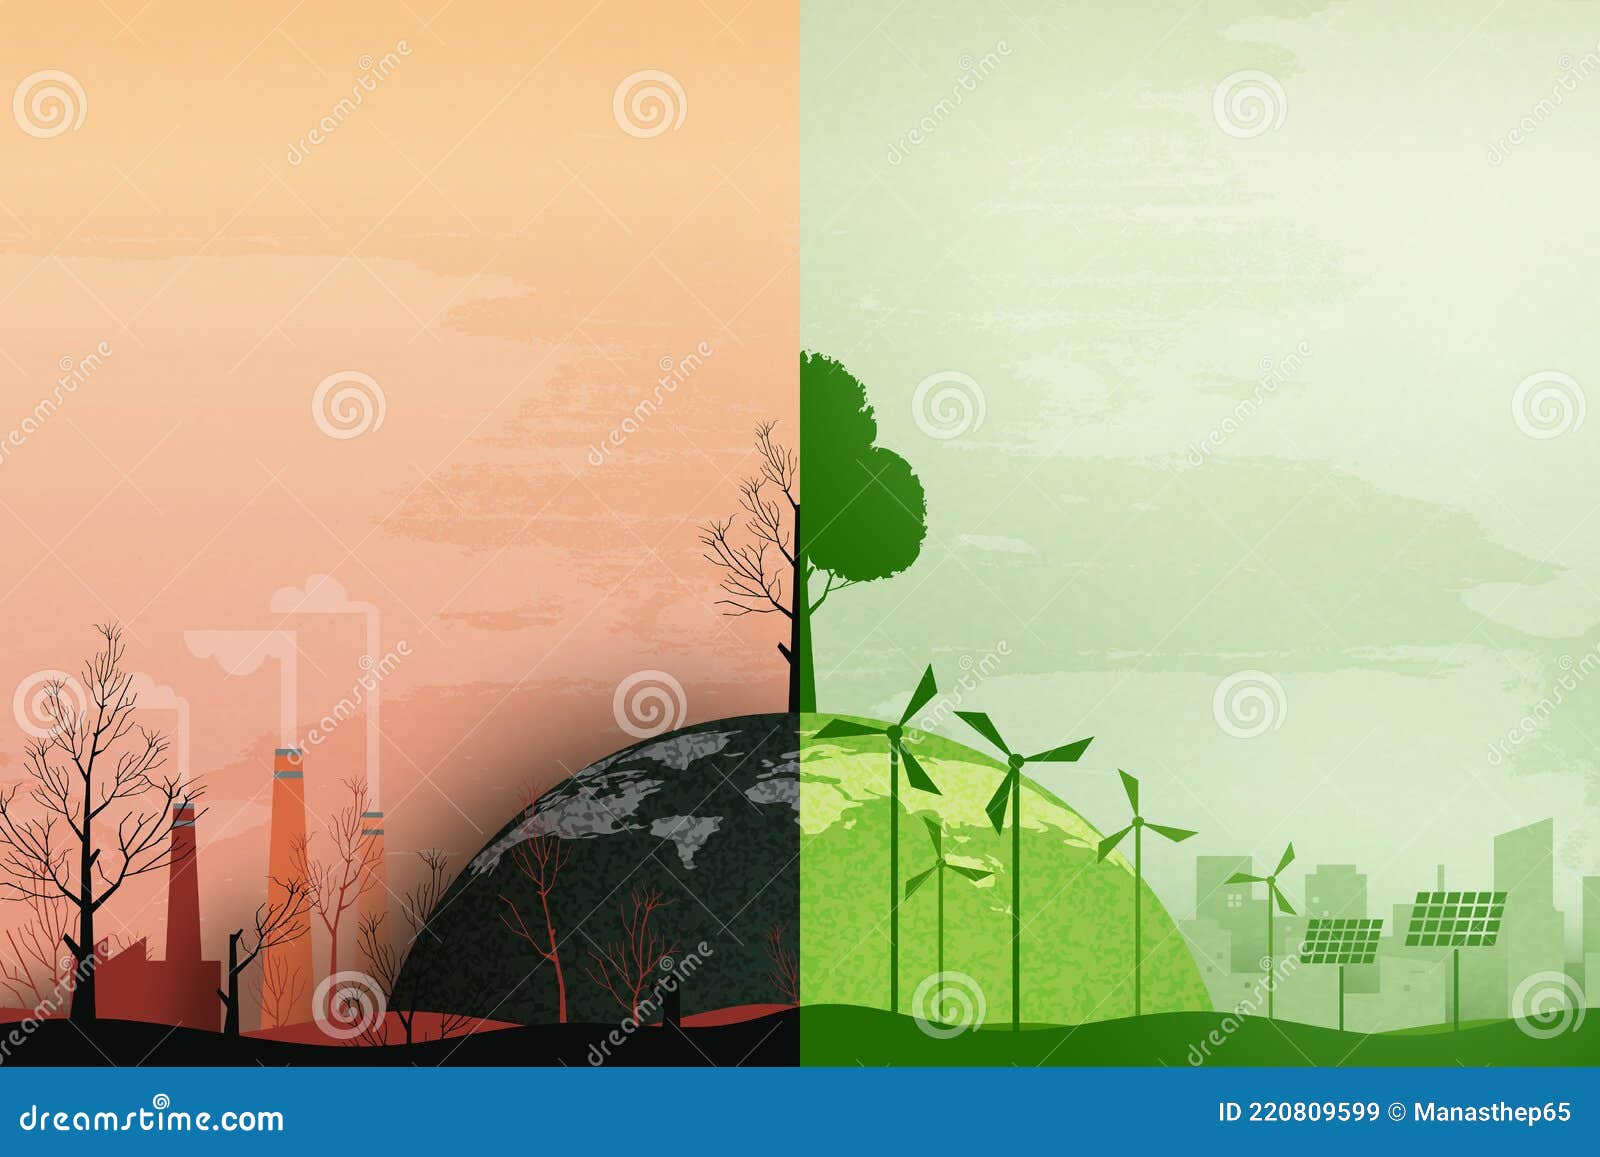 Global Warming and Climate Change  World of Polluted and Green  Environment Background Stock Vector - Illustration of environmental,  factory: 220809599